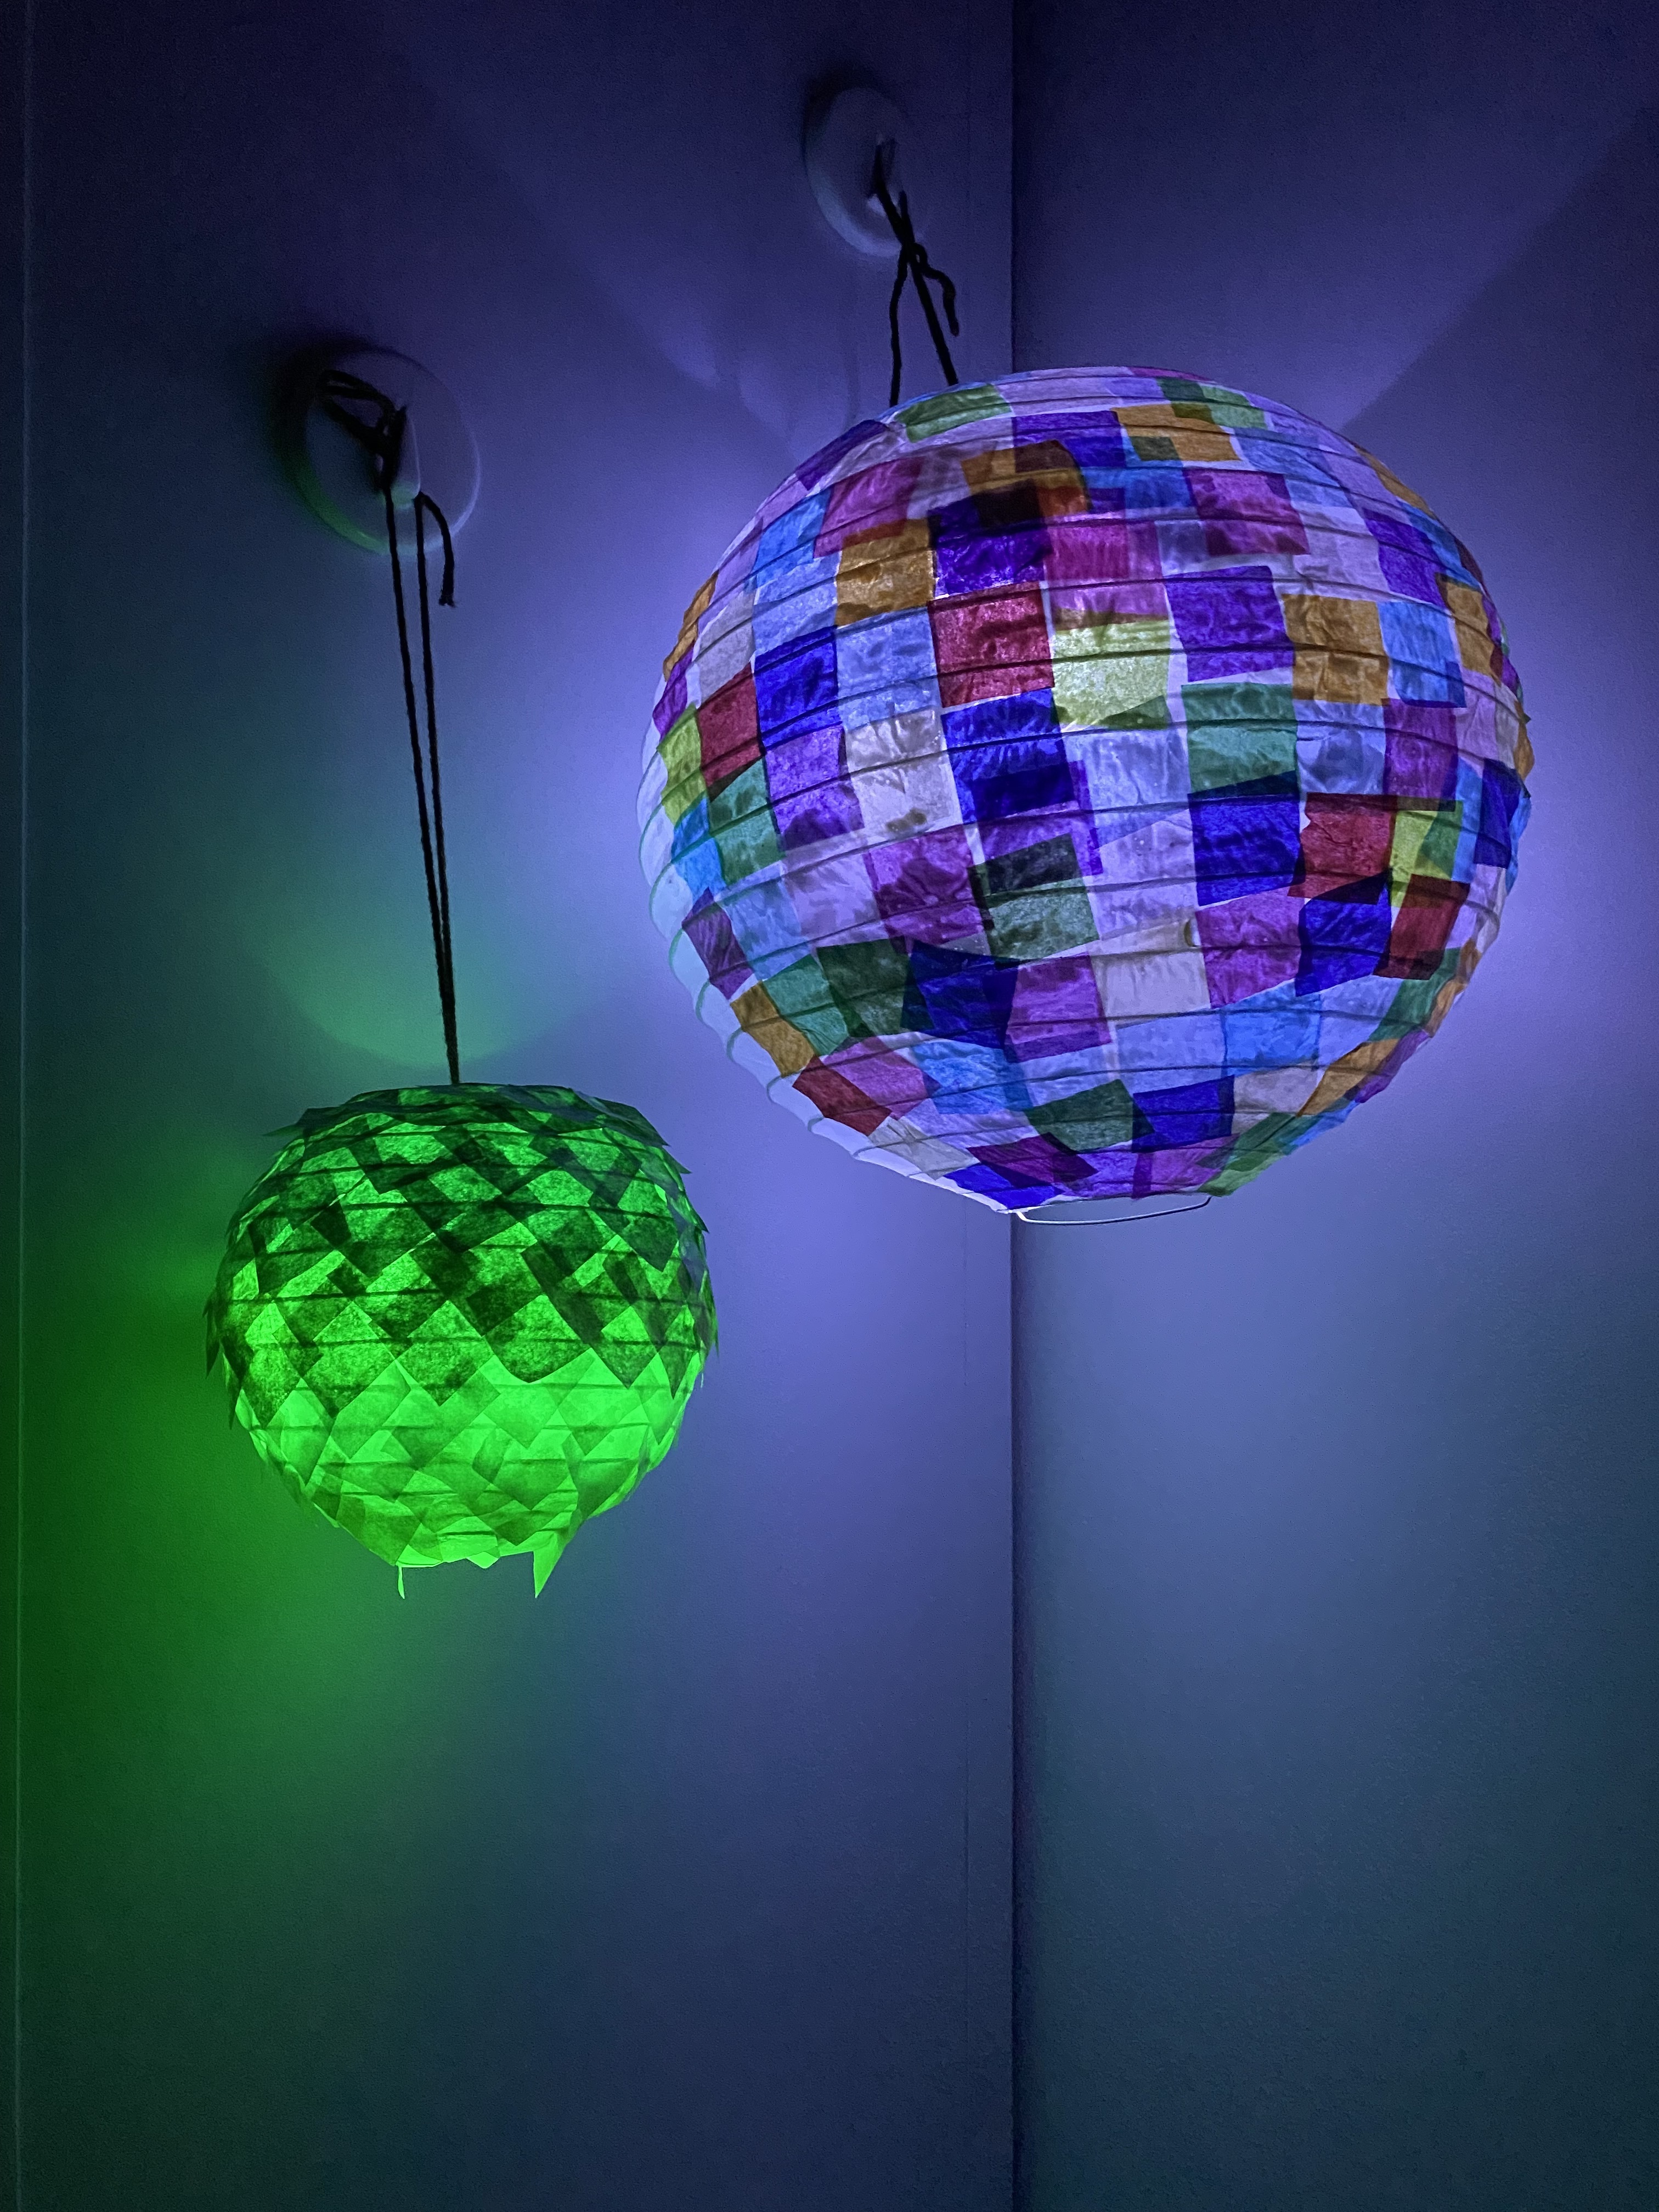 Two paper lanterns -- one green, one mosaic -- hang lit in a darkened room